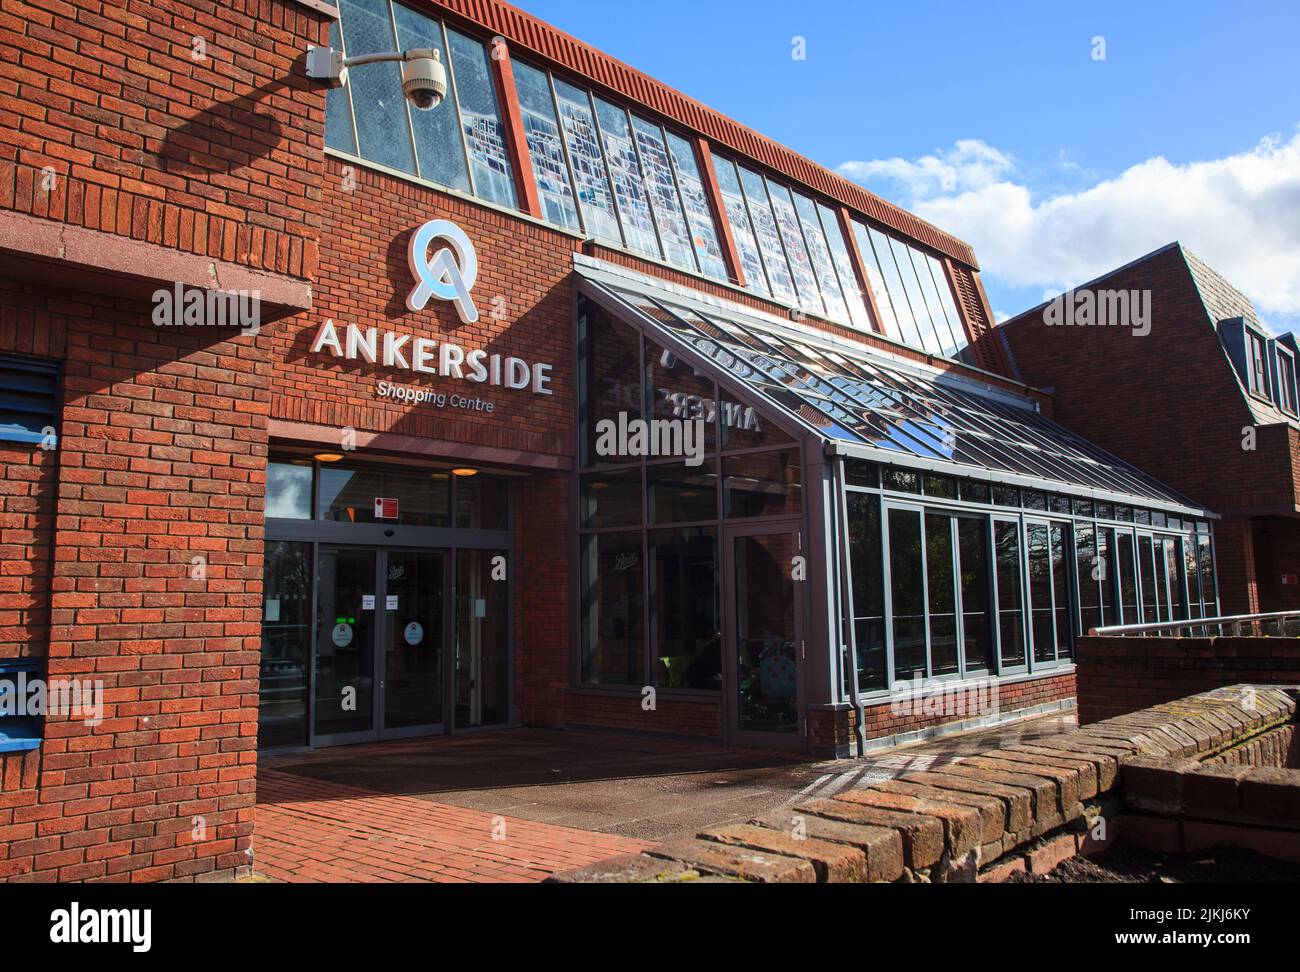 The entrance of the Ankerside shopping center on a sunny day in Tamworth, Staffordshire, England Stock Photo